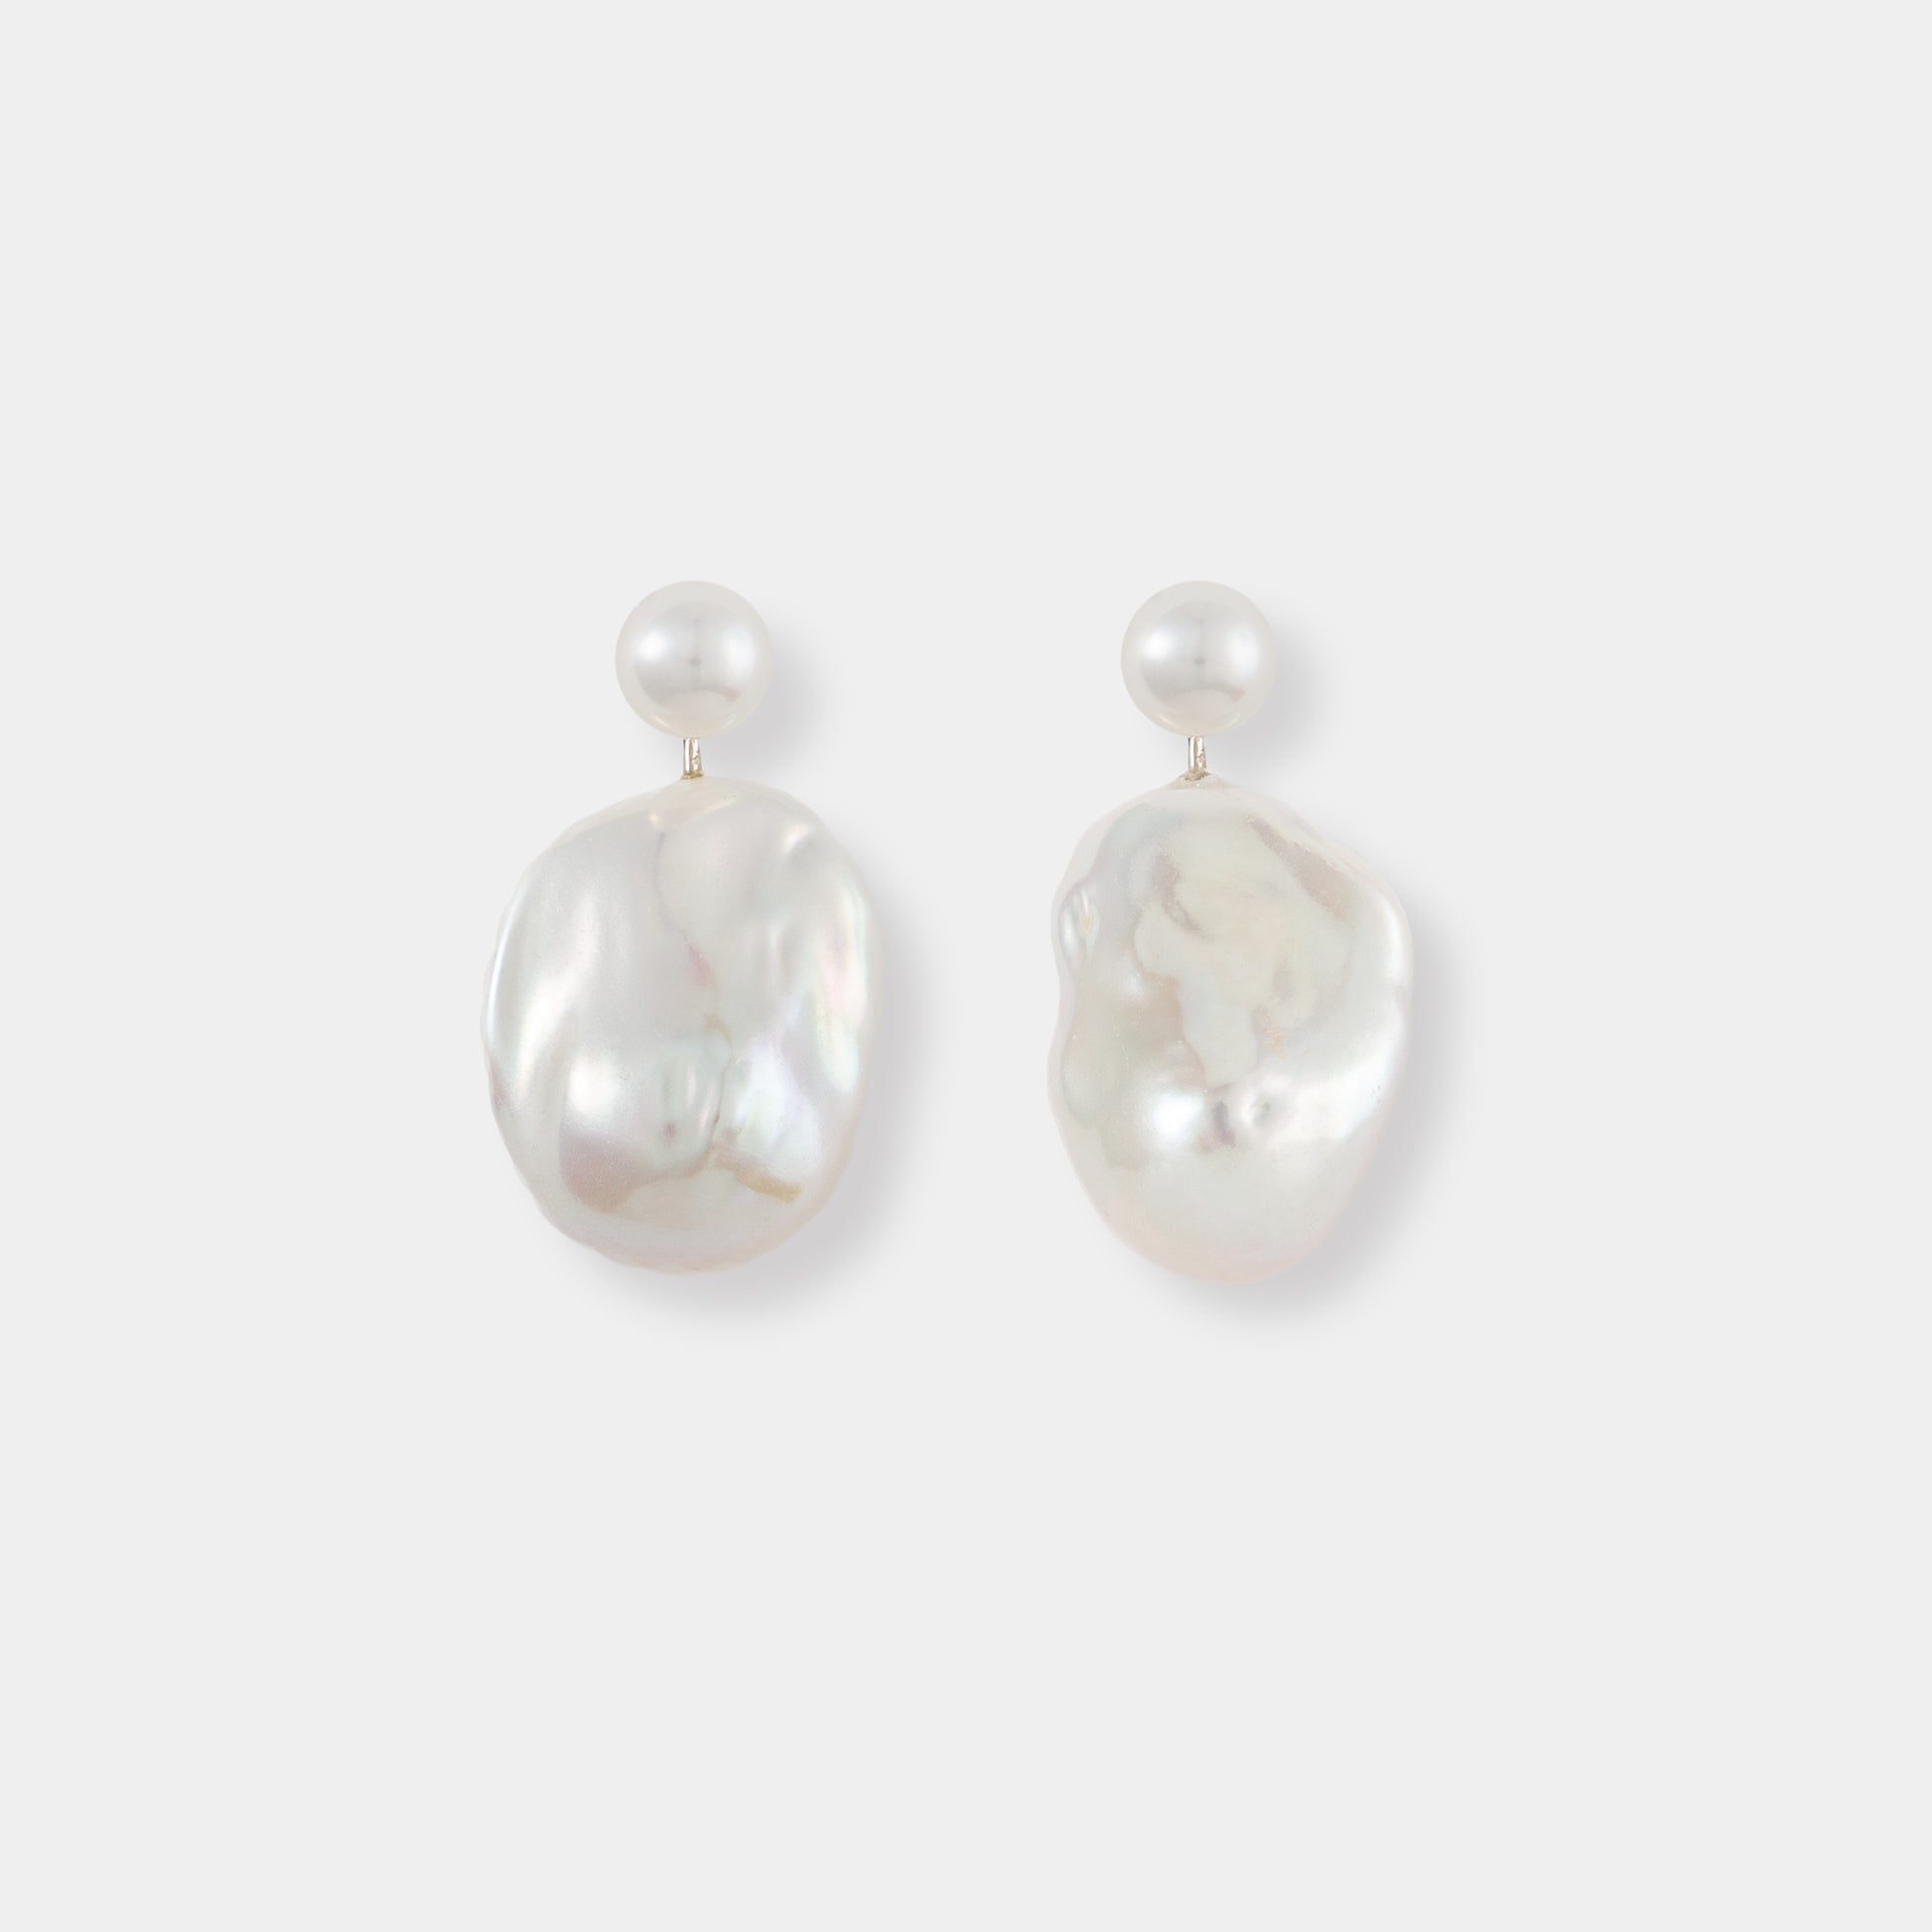 Stylish Baroque Pearl Charm Piercing earrings featuring beautiful white pearls, a must-have accessory.